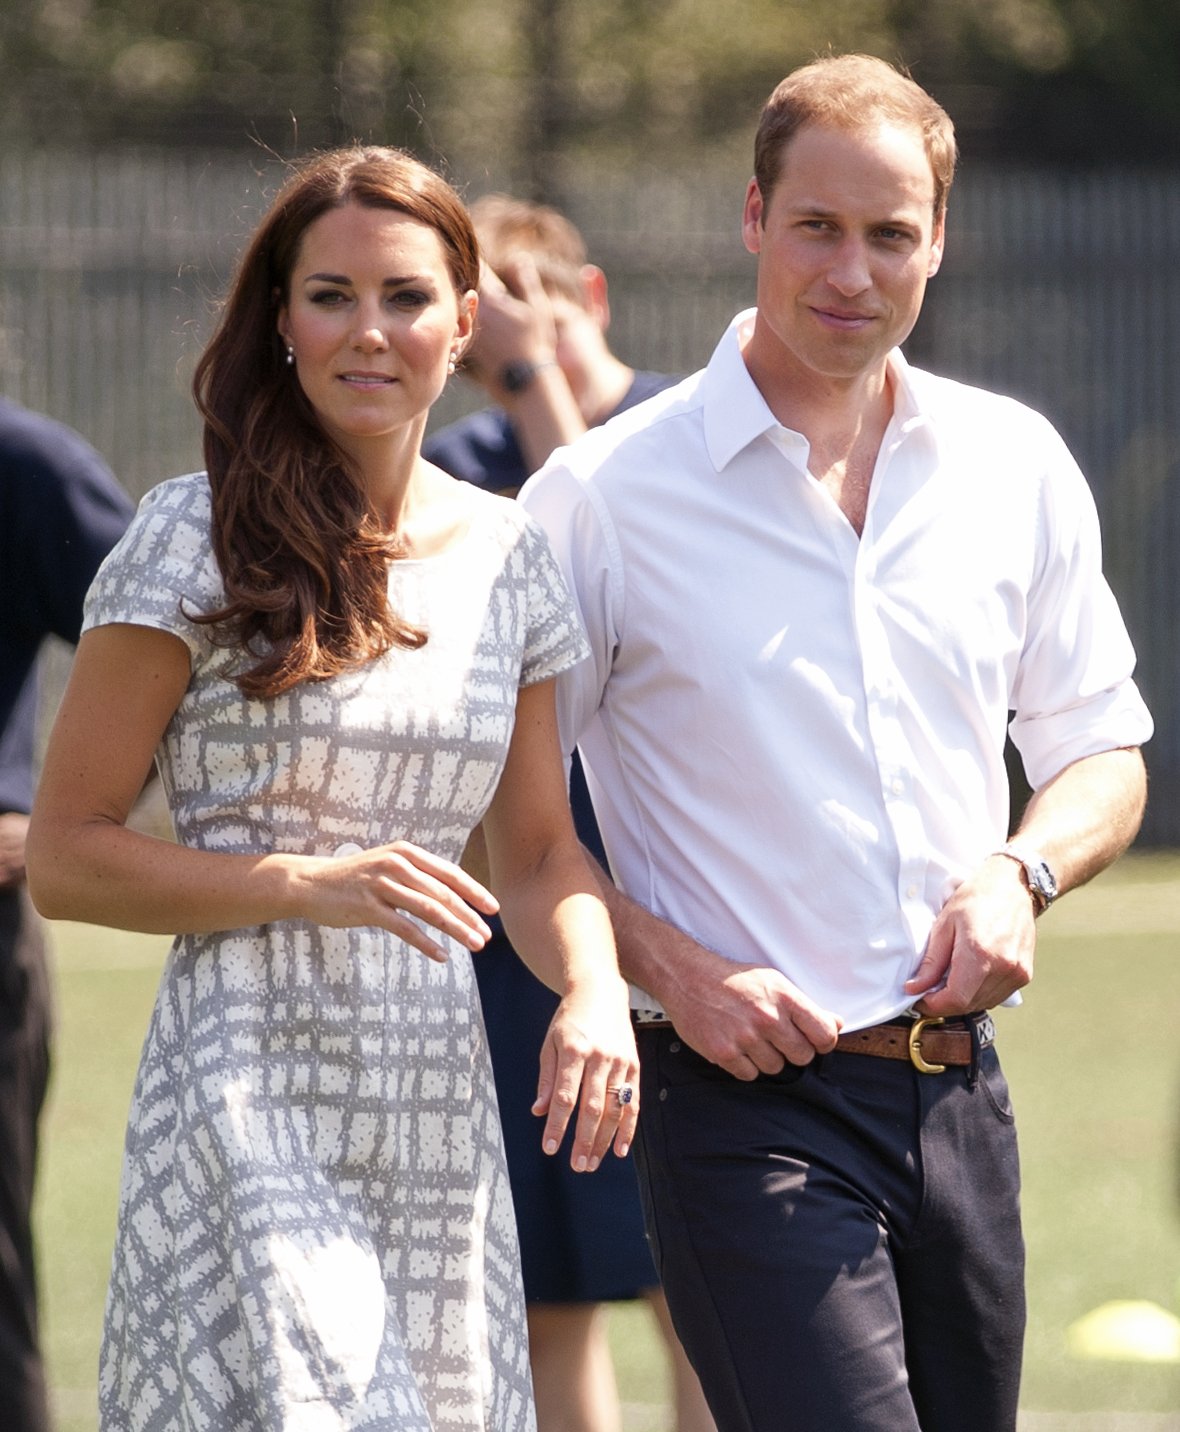 Kate Middleton and Prince Williamin London 2012. | Source: Getty Images